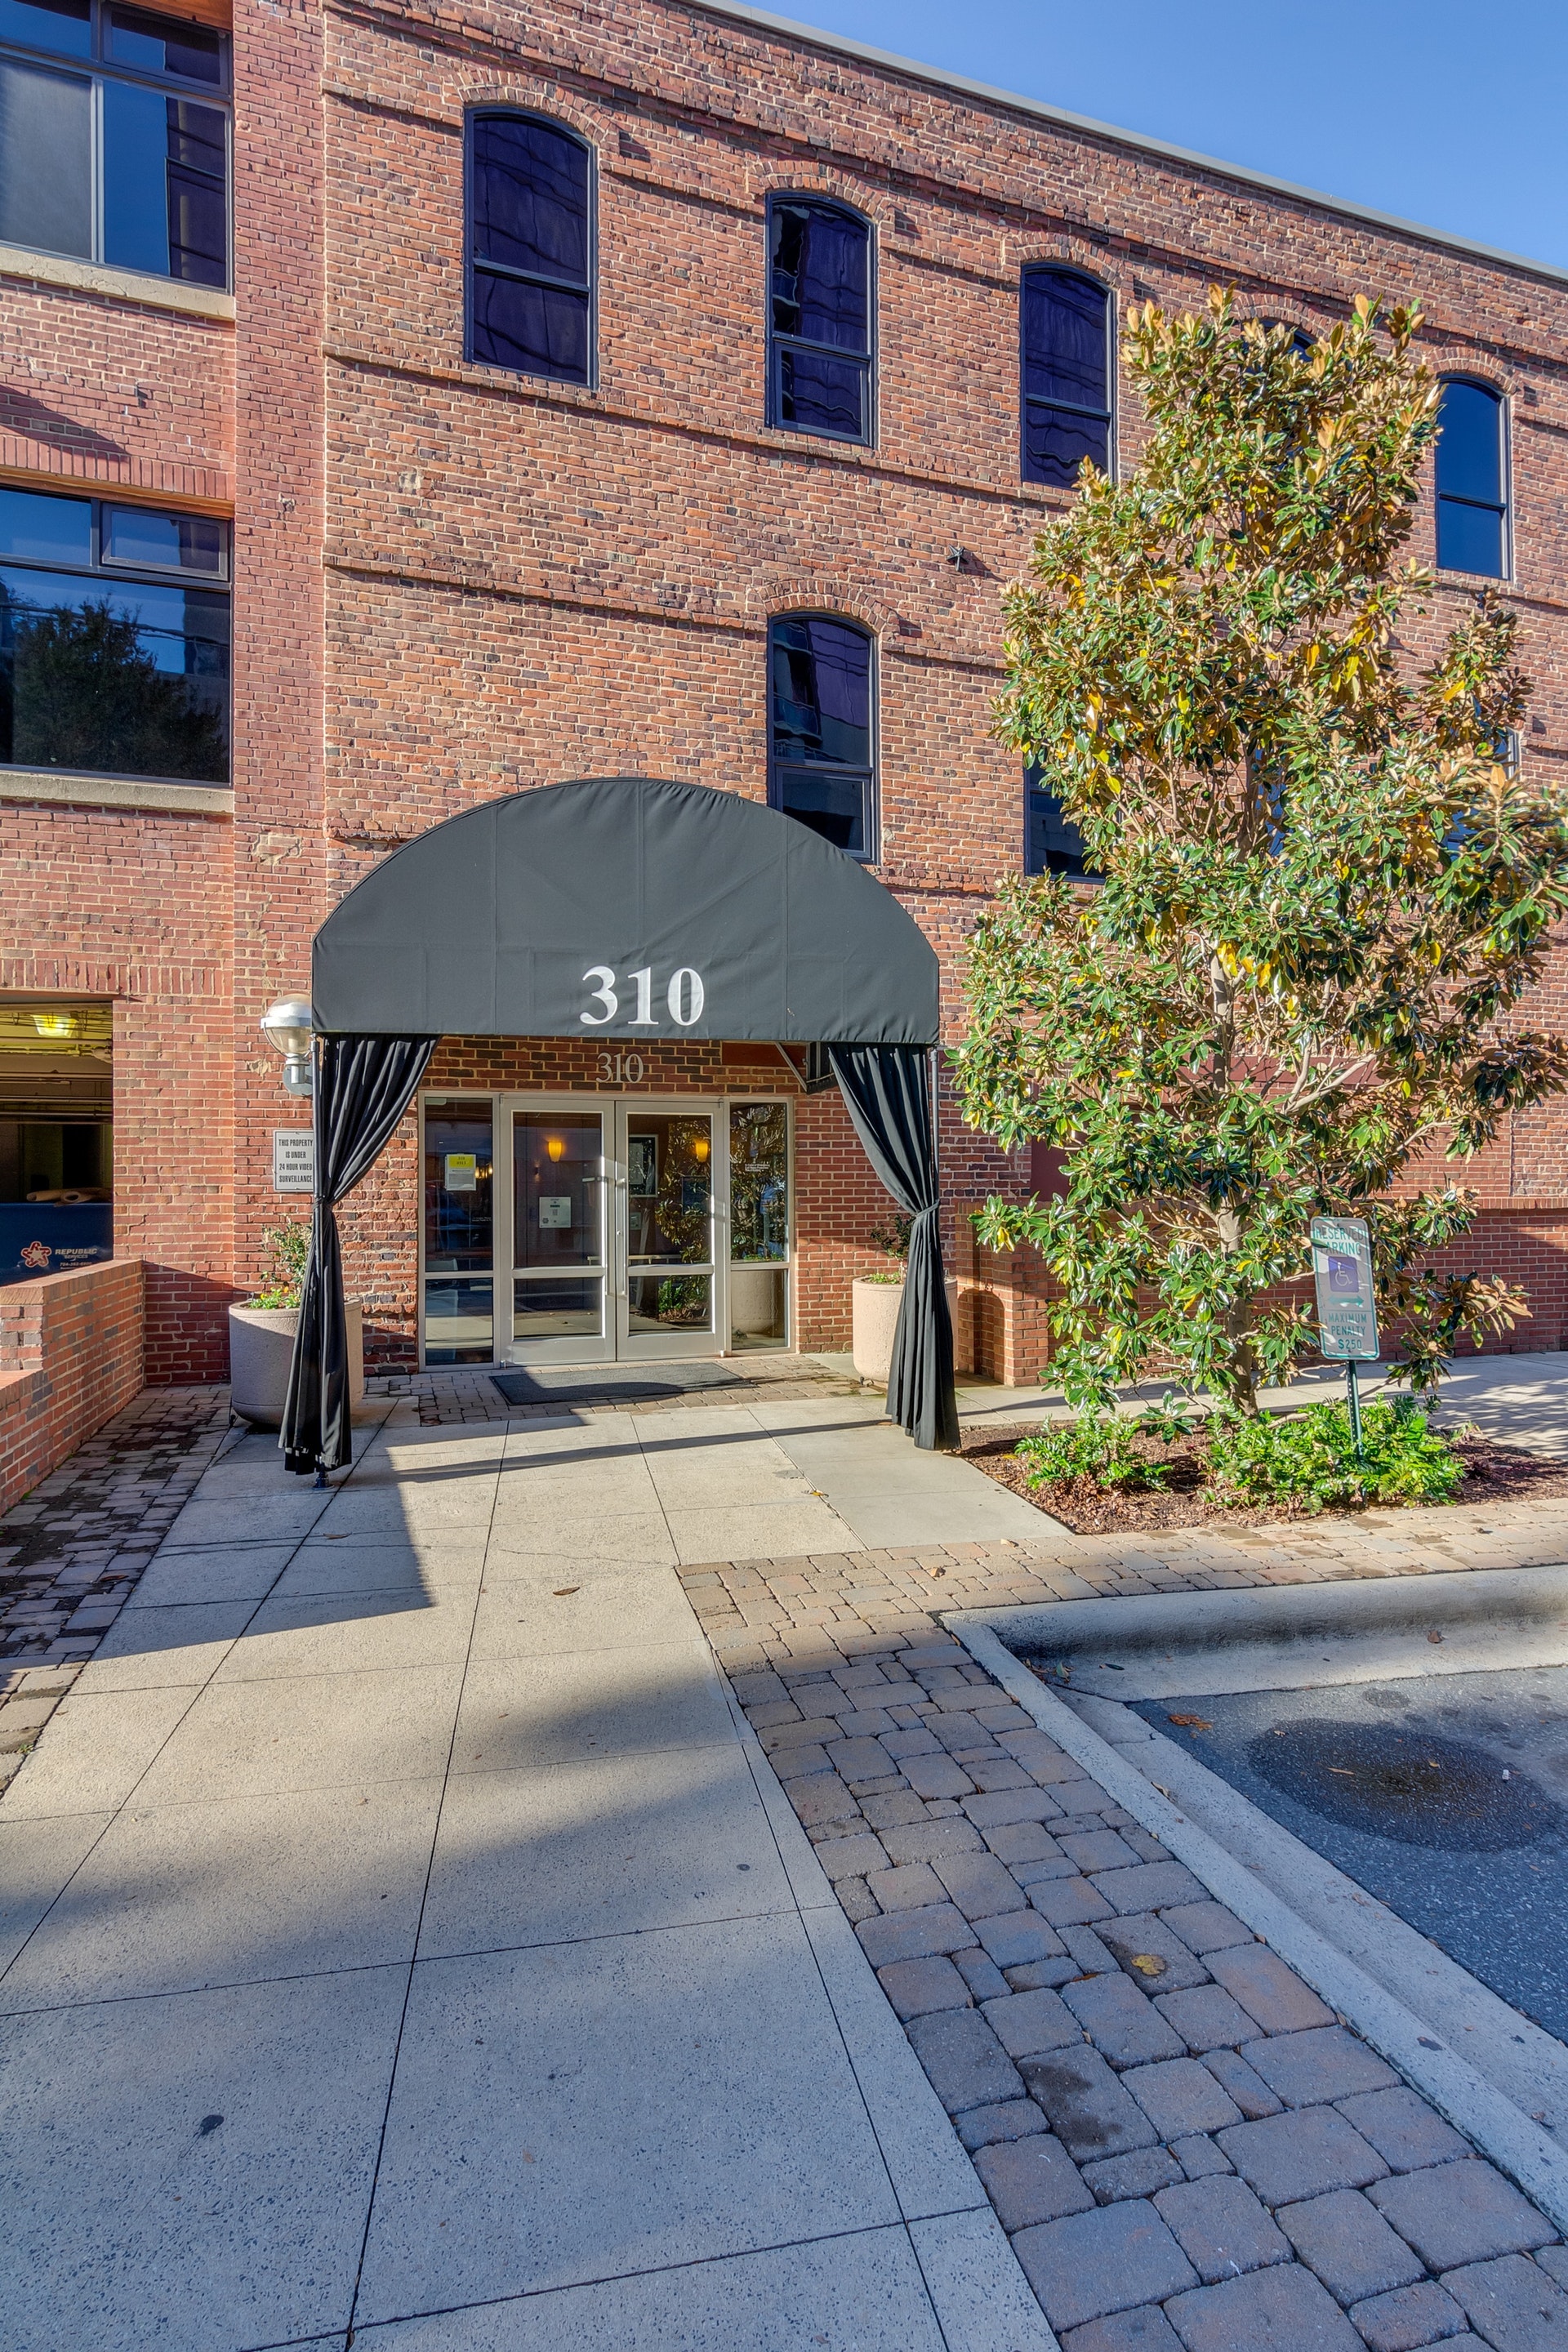 Red brick condo building with black awning with white 310 printed on it